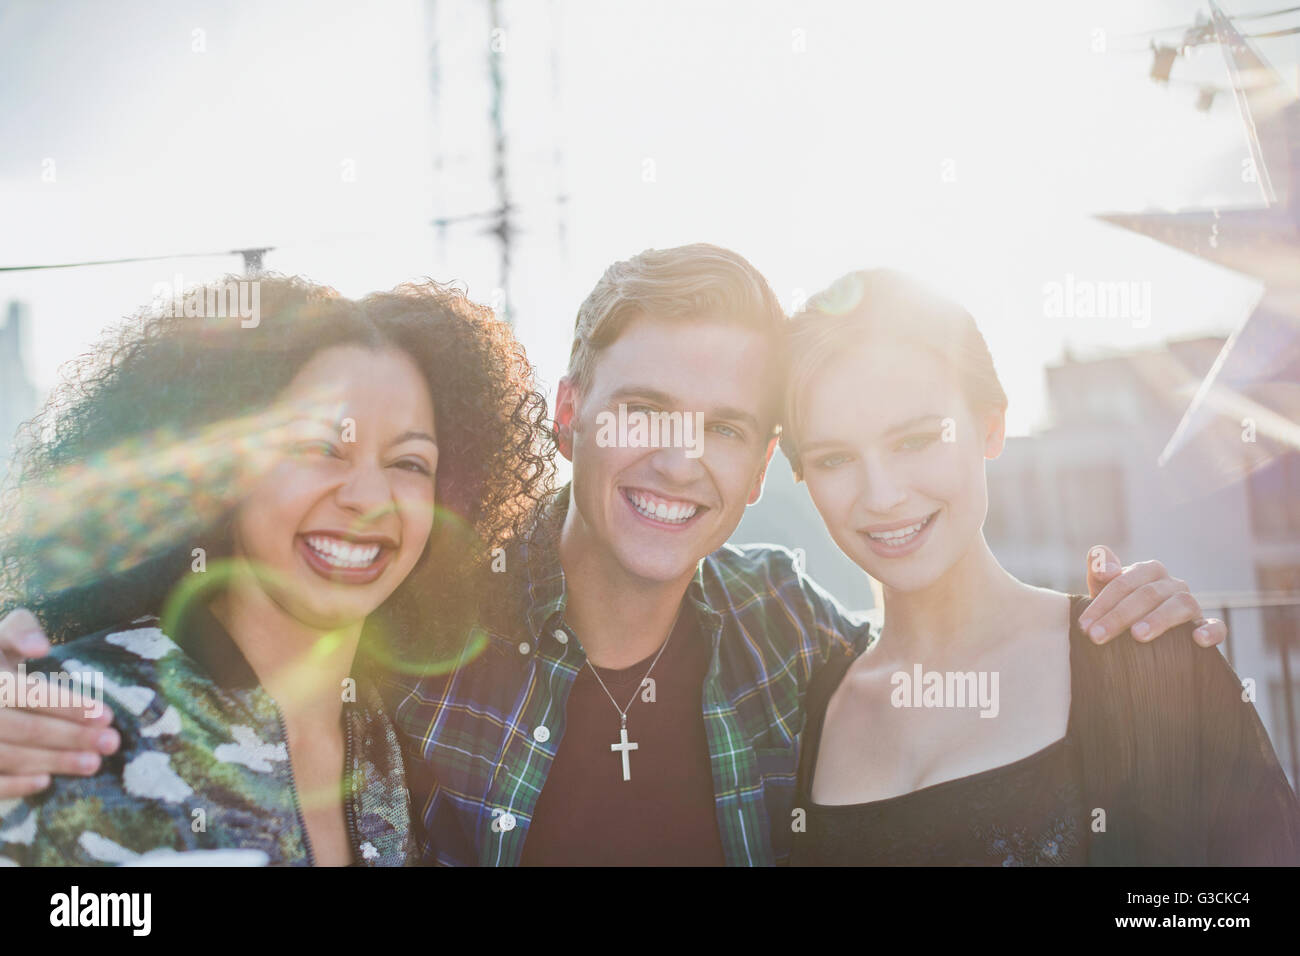 Portrait young adult friends smiling outside Stock Photo